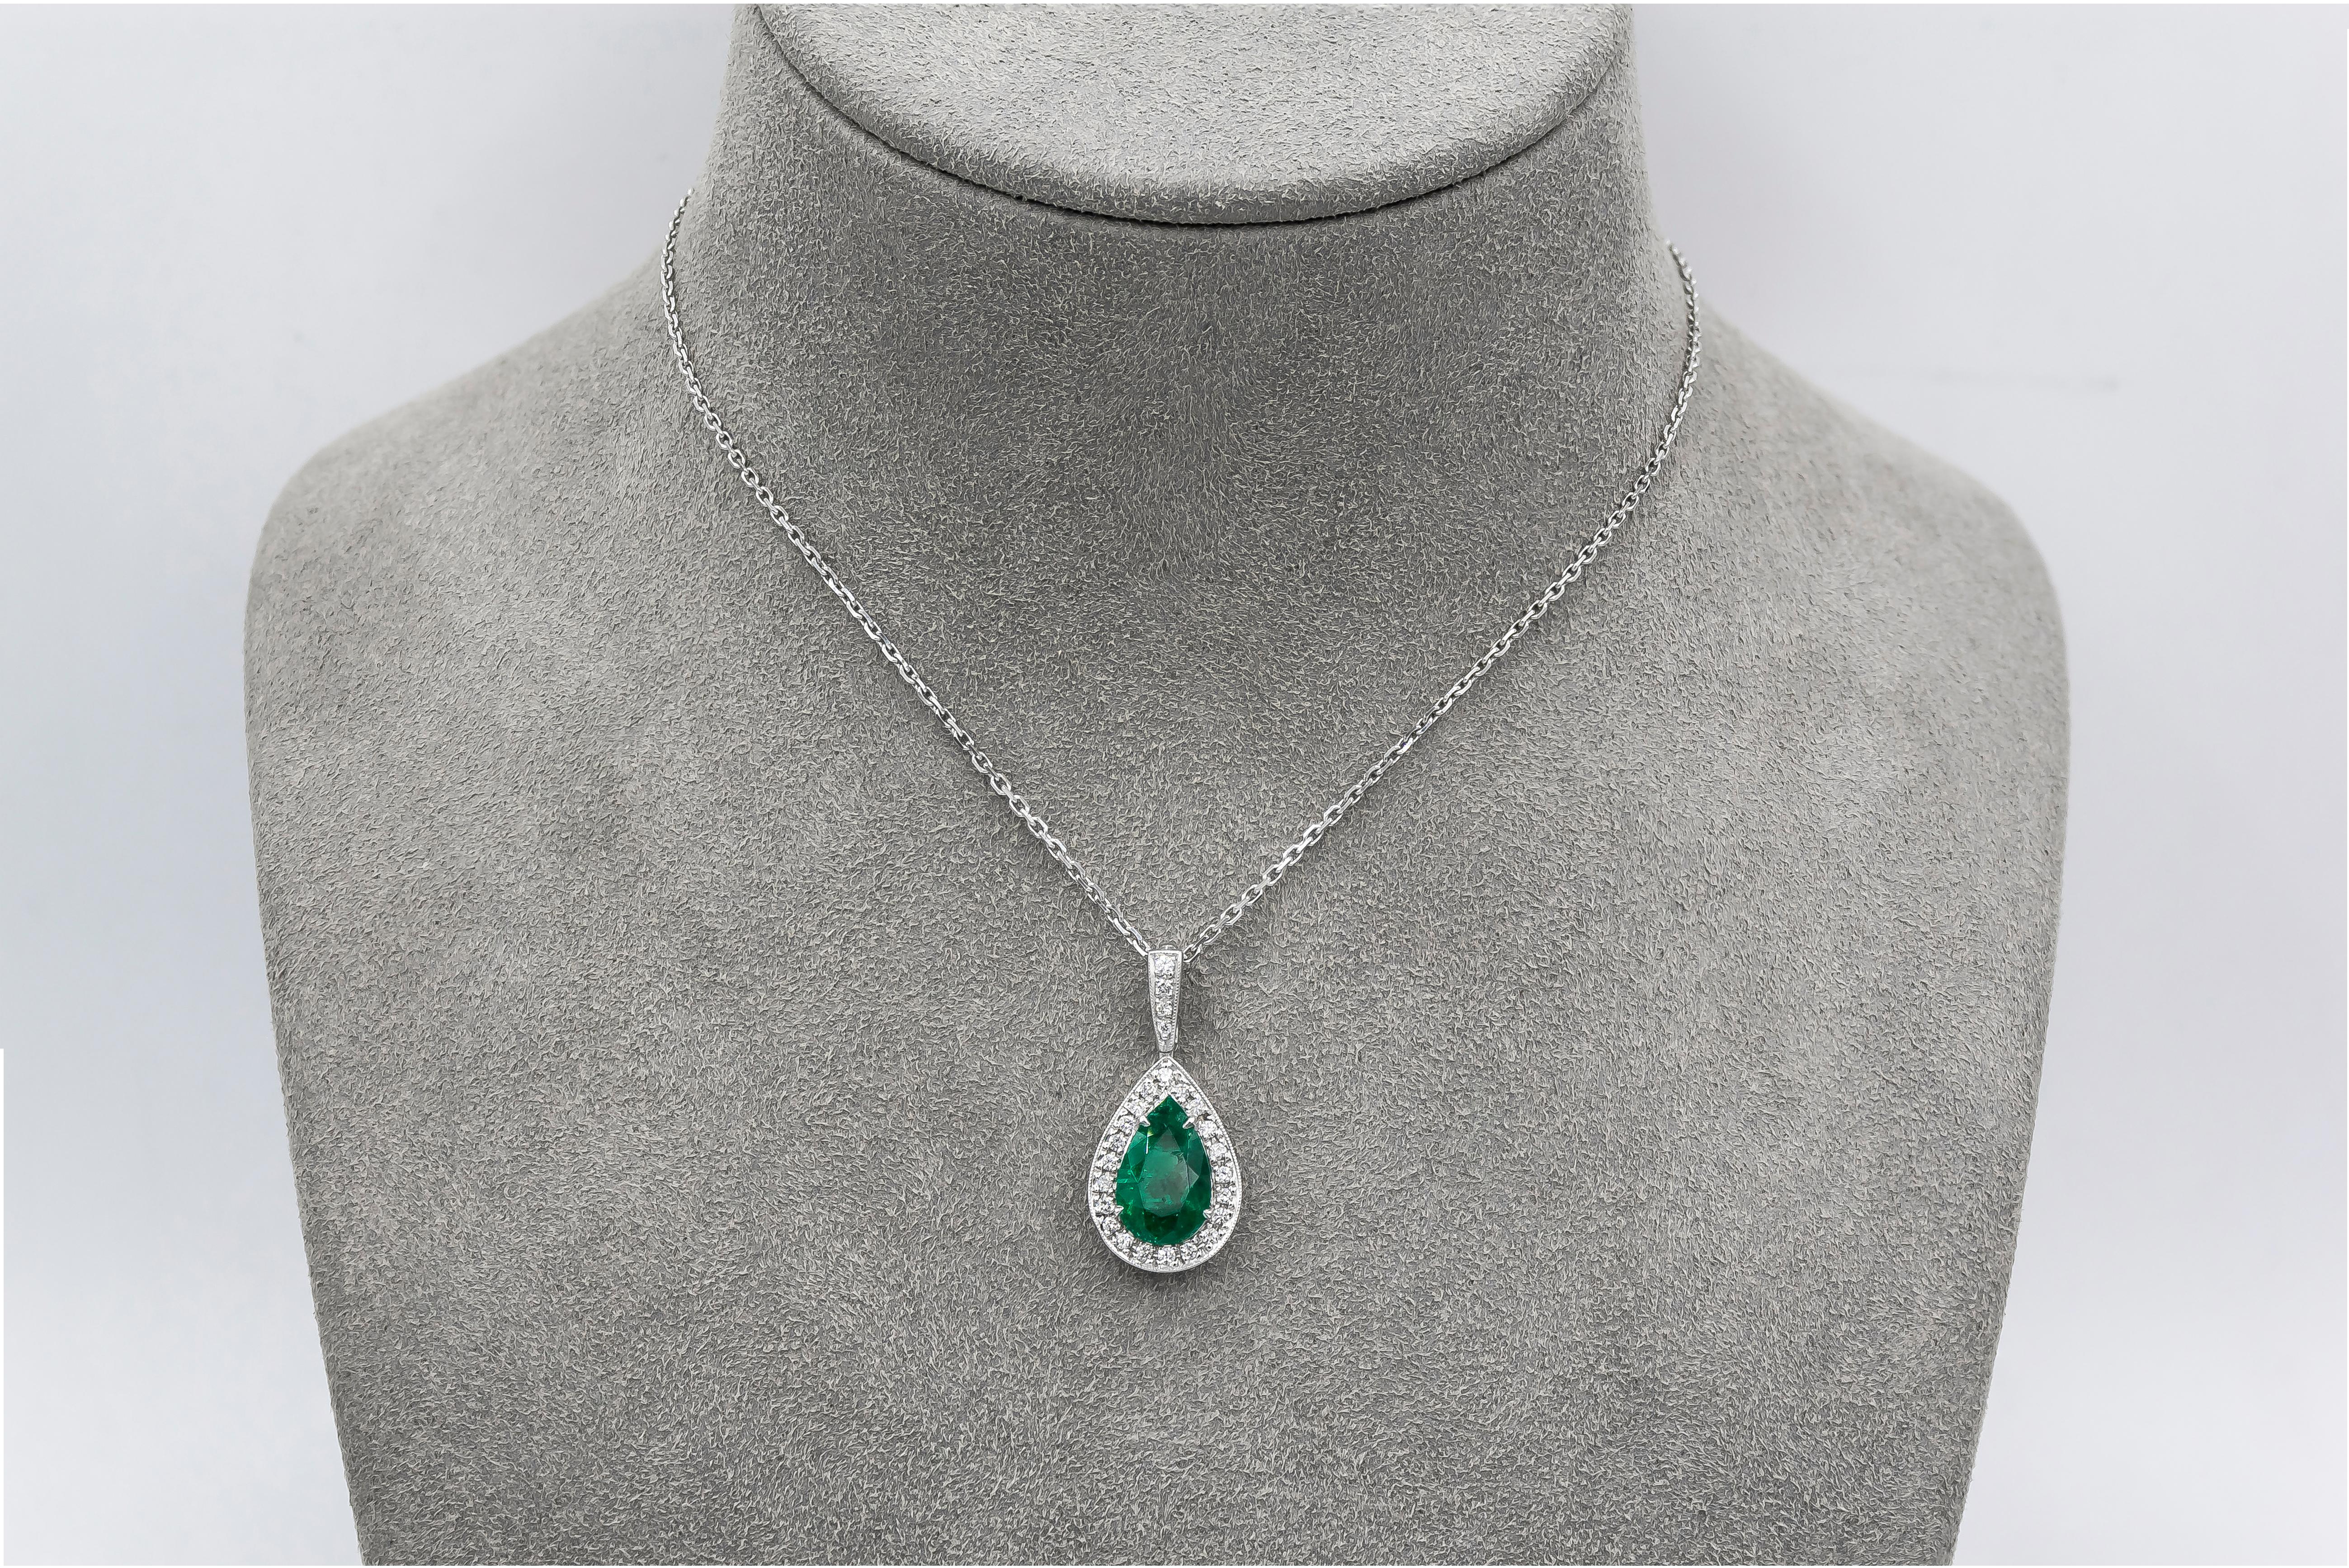 Showcasing a 1.89 carat pear shape green emerald, surrounded by a single row of round brilliant diamonds. Attached to a diamond encrusted bale, on an 18 inch white gold chain. Finished with milgrain design for an extra antique style and feel.